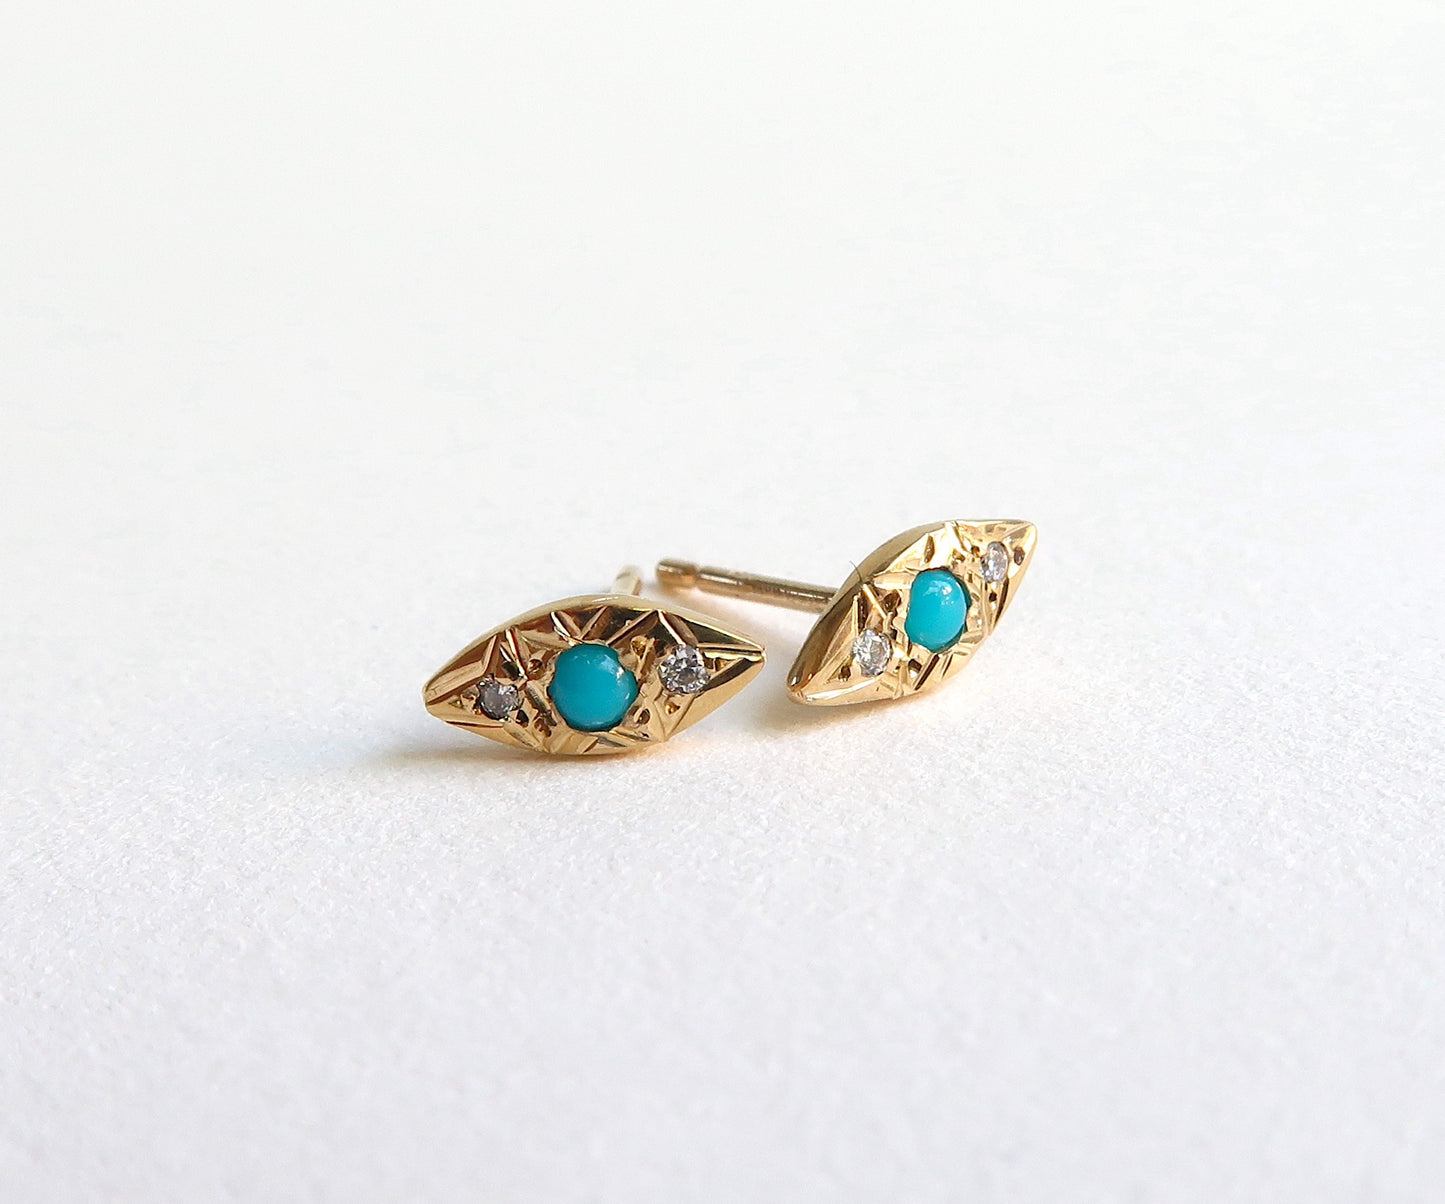 Turquoise and diamond gold studs